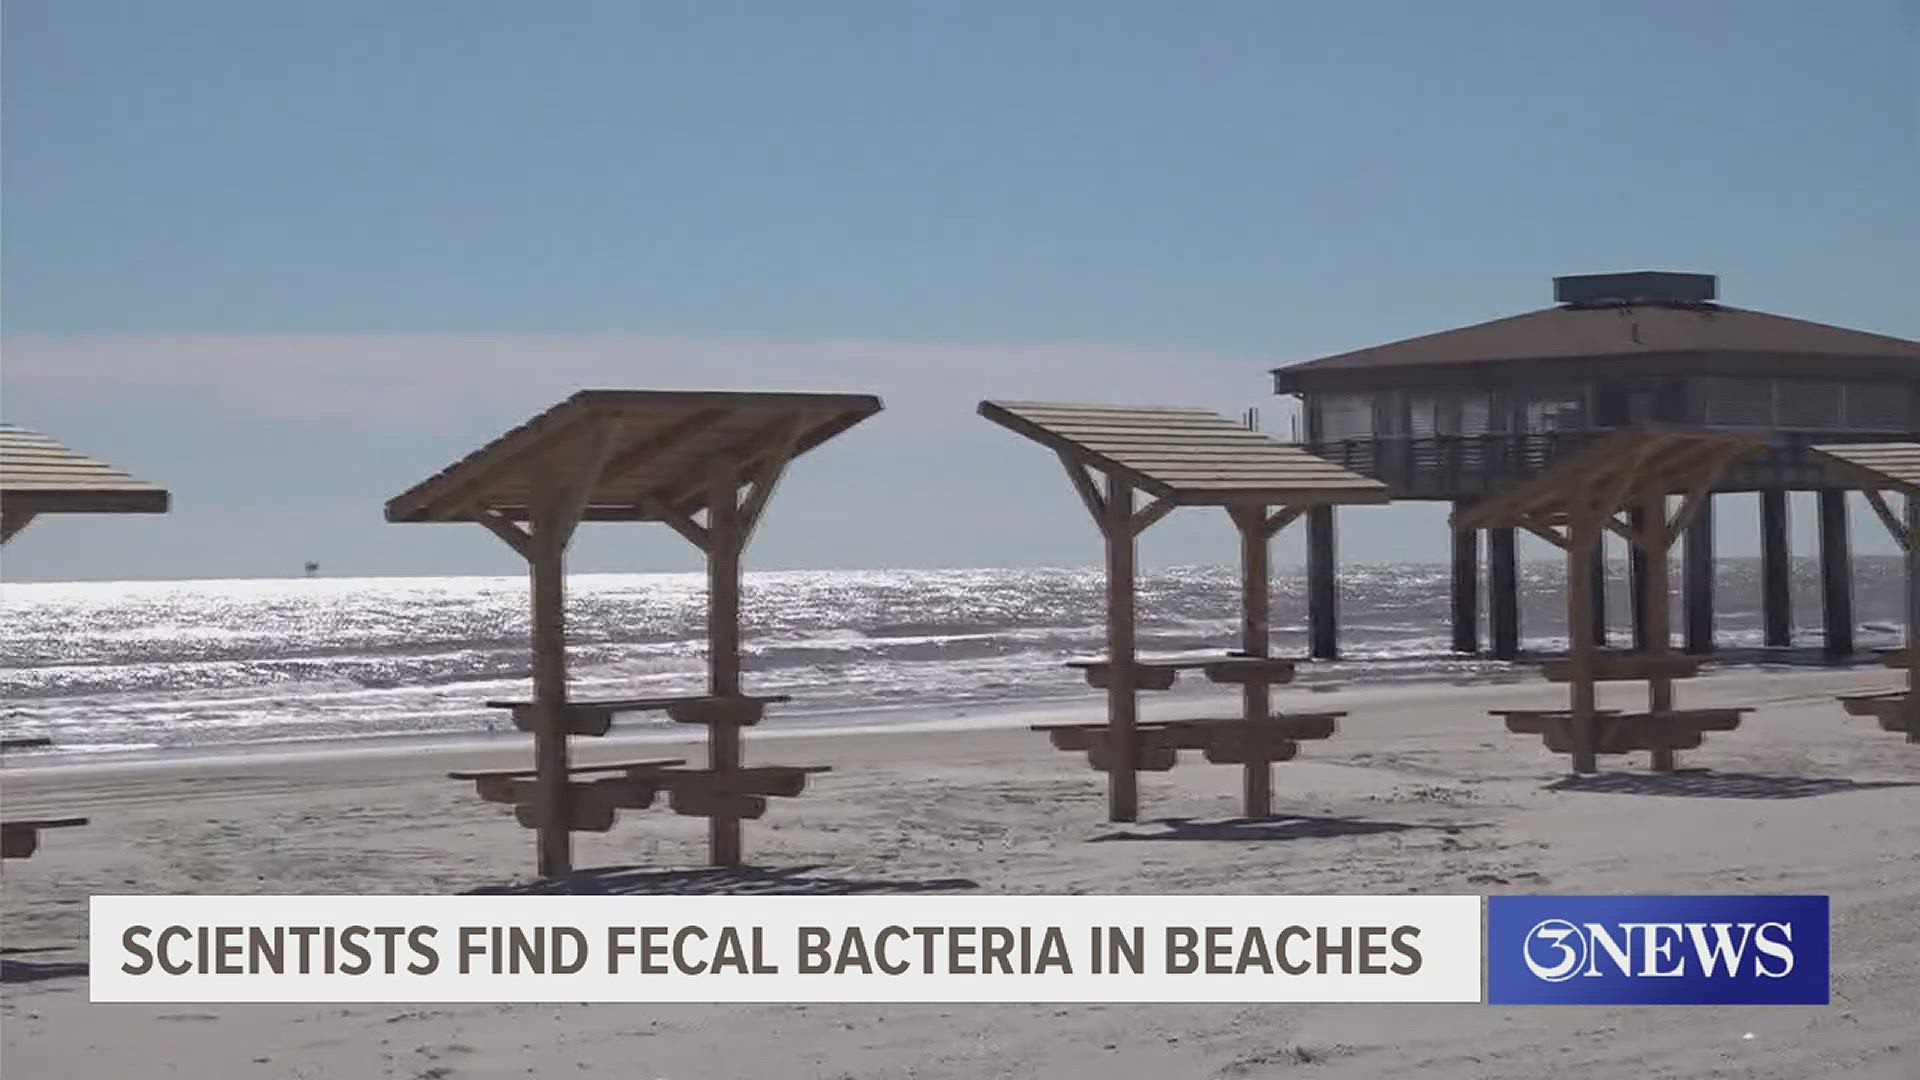 According to data from the Blue Water Task Force, medium level bacteria was found at Padre Balli Beach and the north JP Luby Surf Park location.